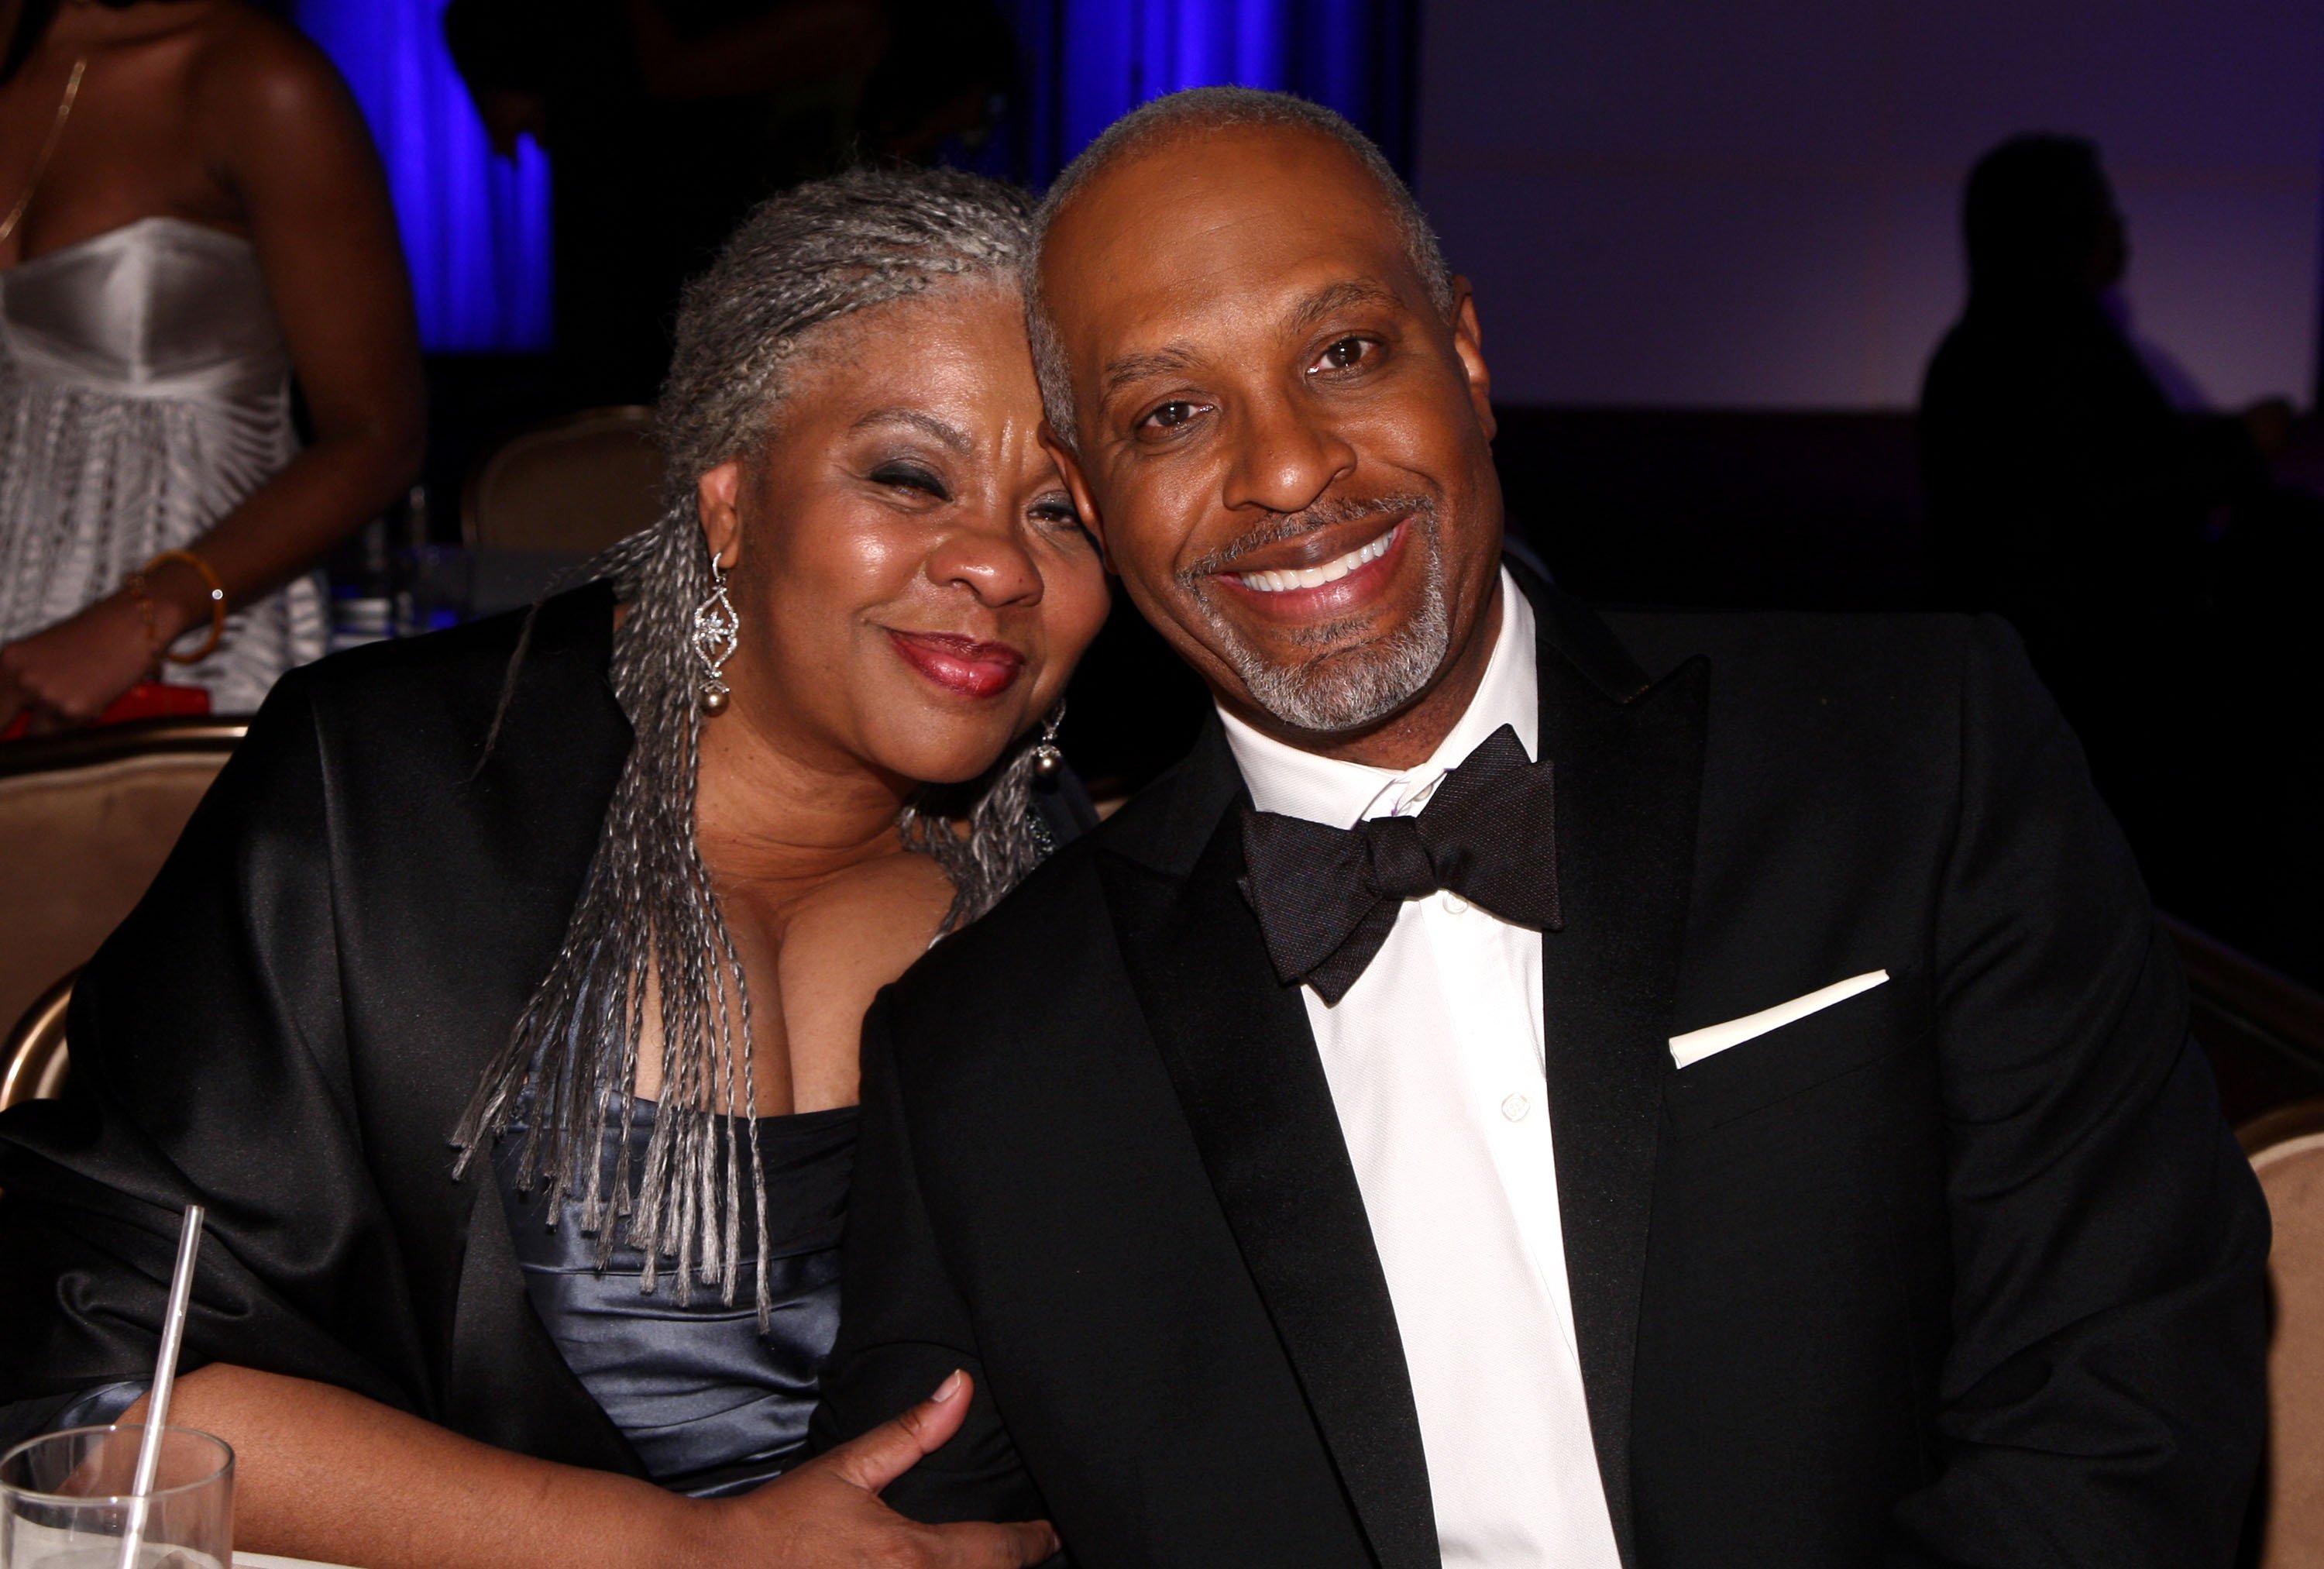 James Pickens Jr. (R) and wife Gina Pickens attends the after party for 40th NAACP Image Awards held at the Beverly Hilton Hotel on February 12, 2009, in Los Angeles, California. | Source: Getty Images.